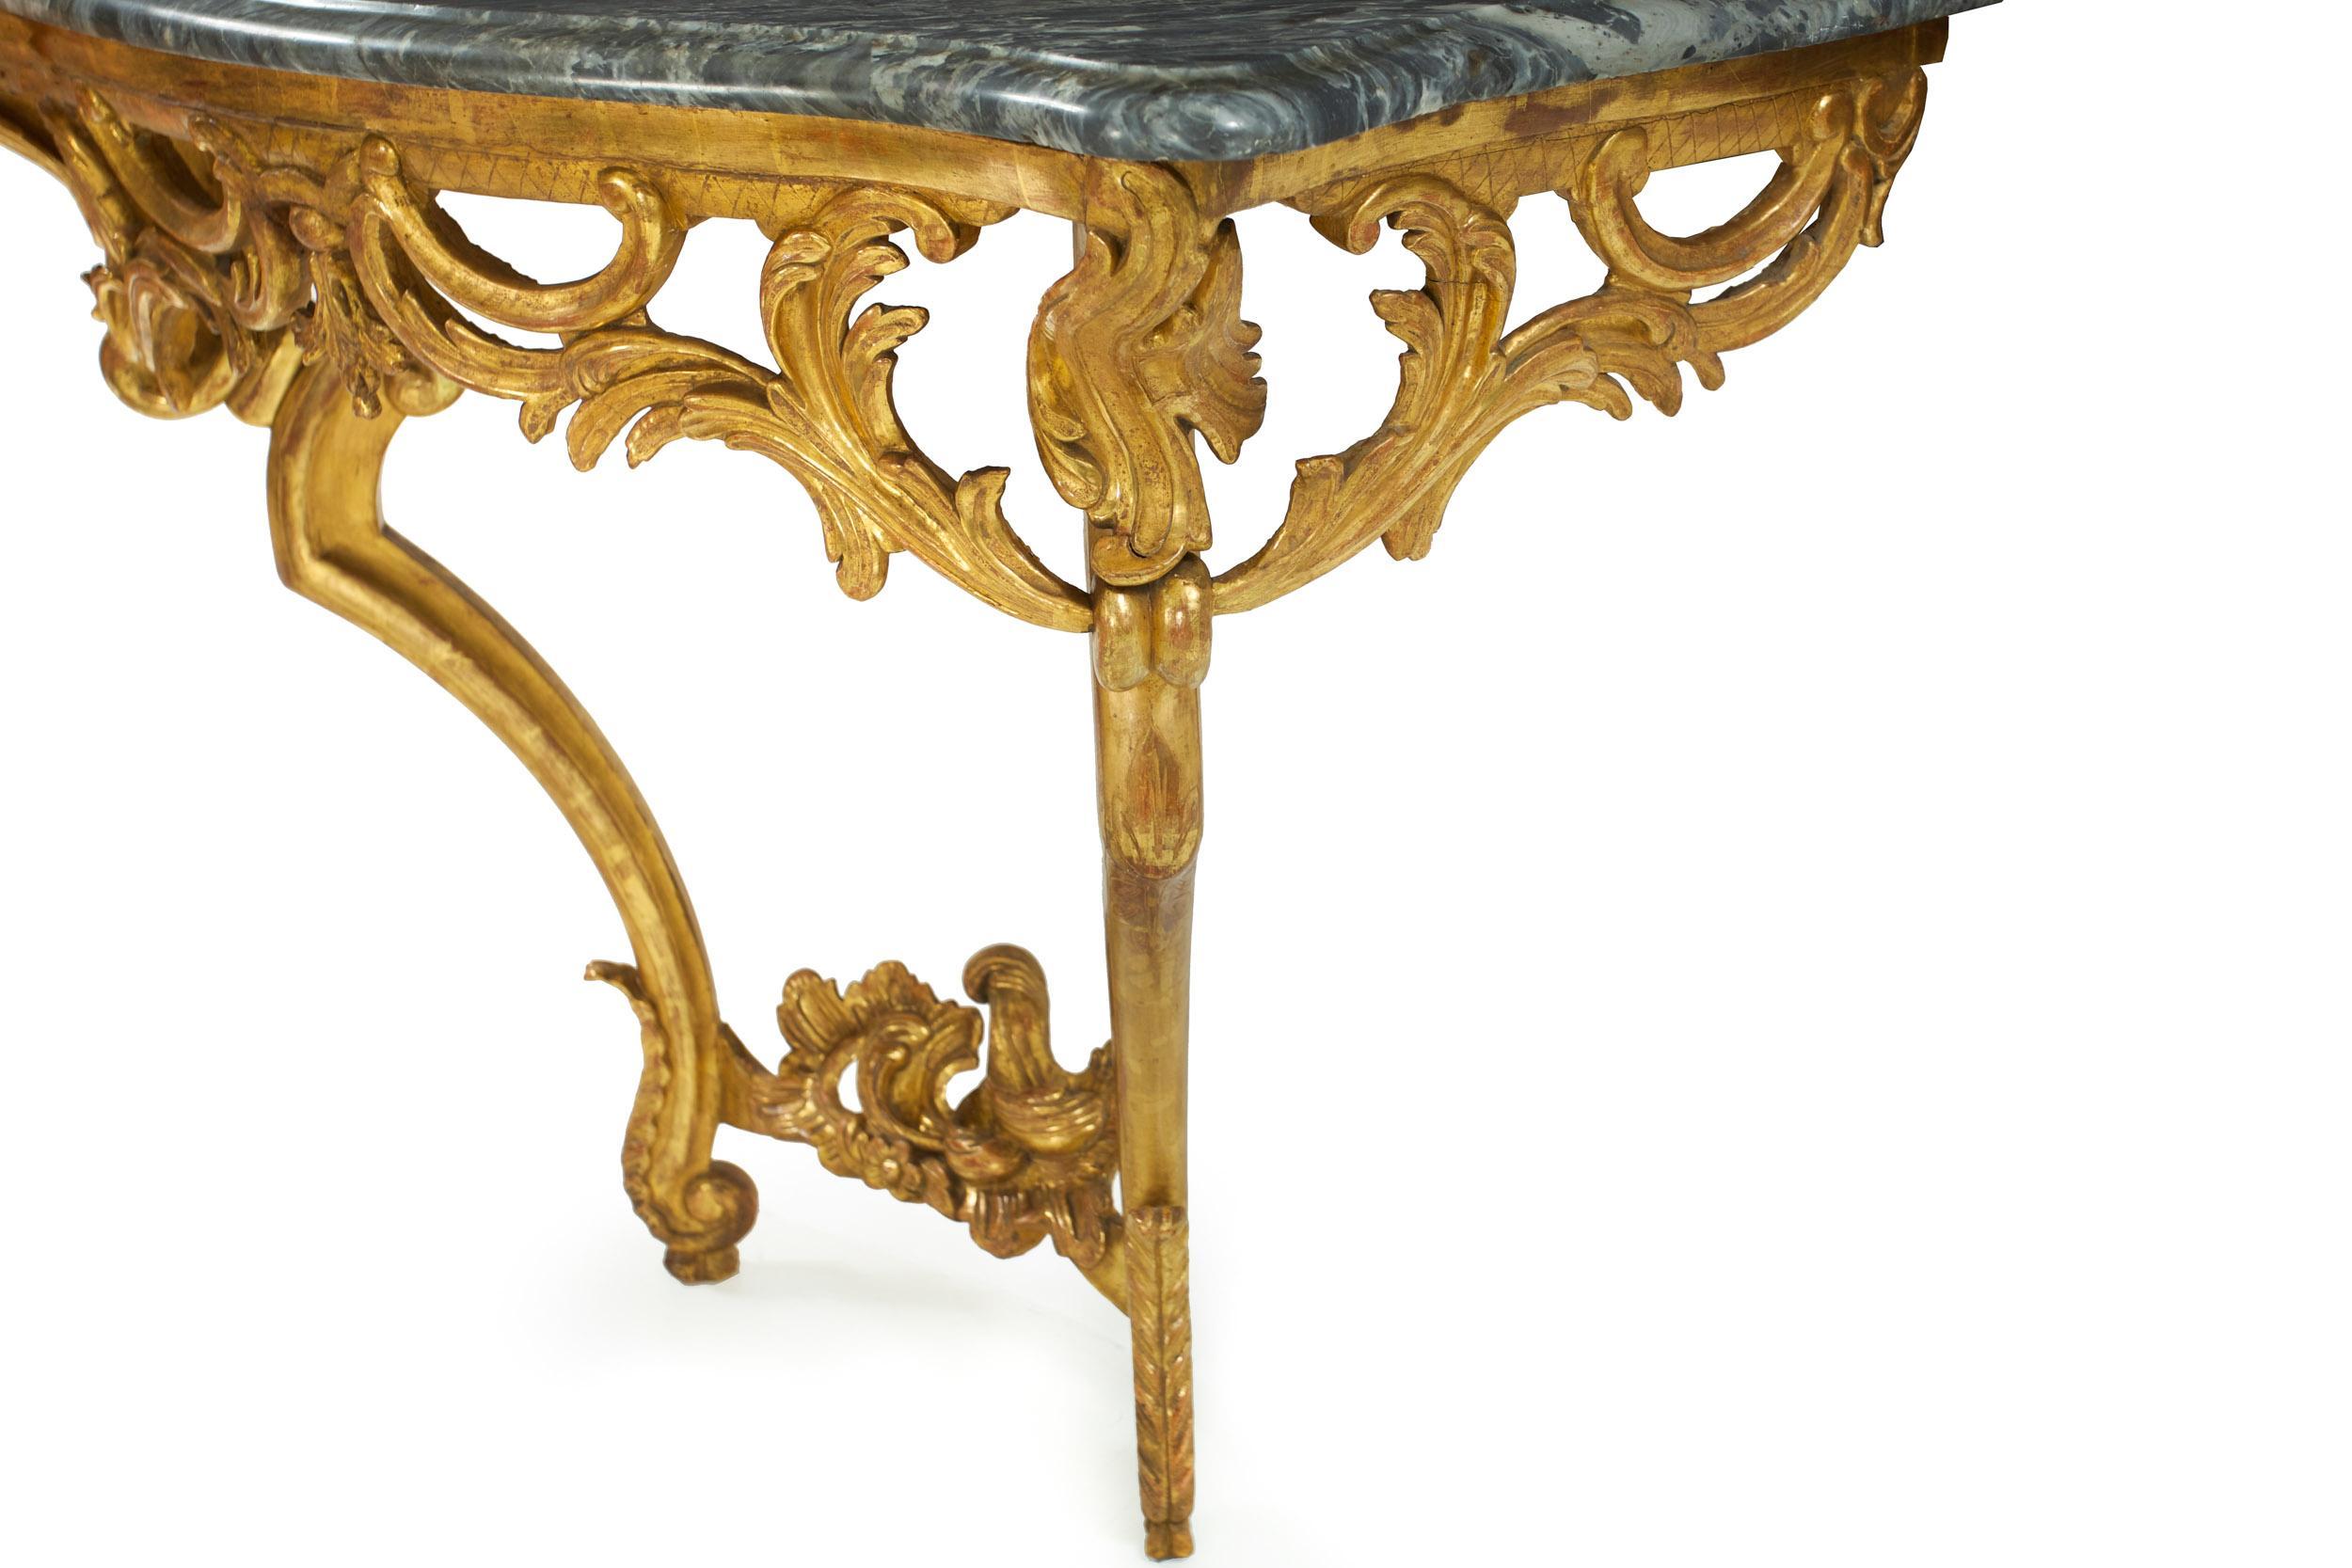 Hand-Carved Rococo Style Carved Giltwood Antique Pier Console Table, 19th Century For Sale